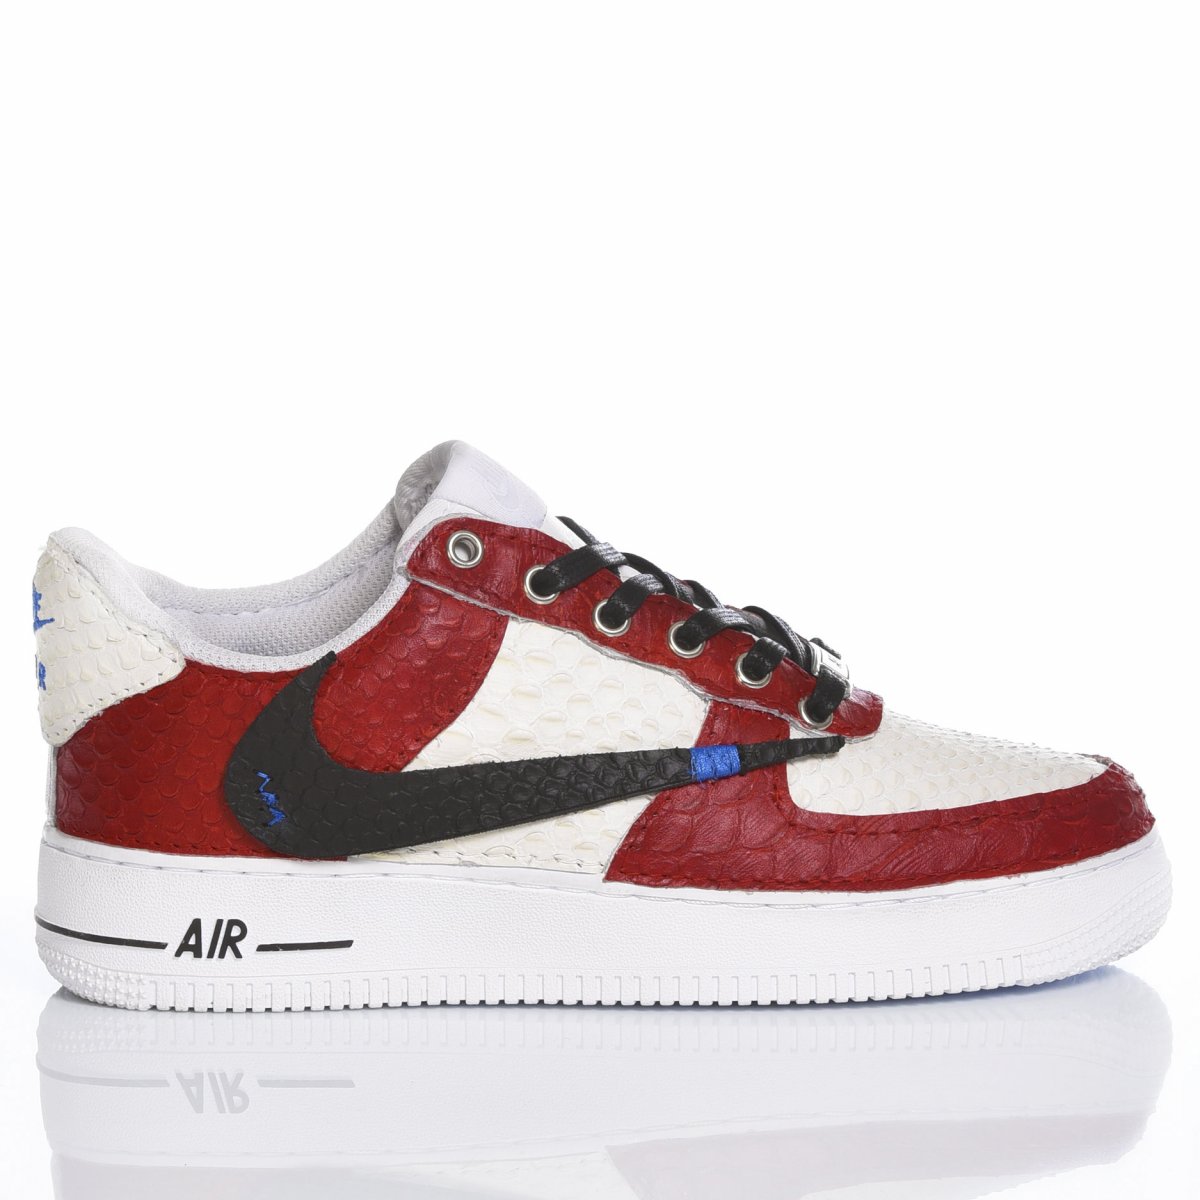 Nike Air Force 1 Club Swoosh Air Force 1 Animalier, Special